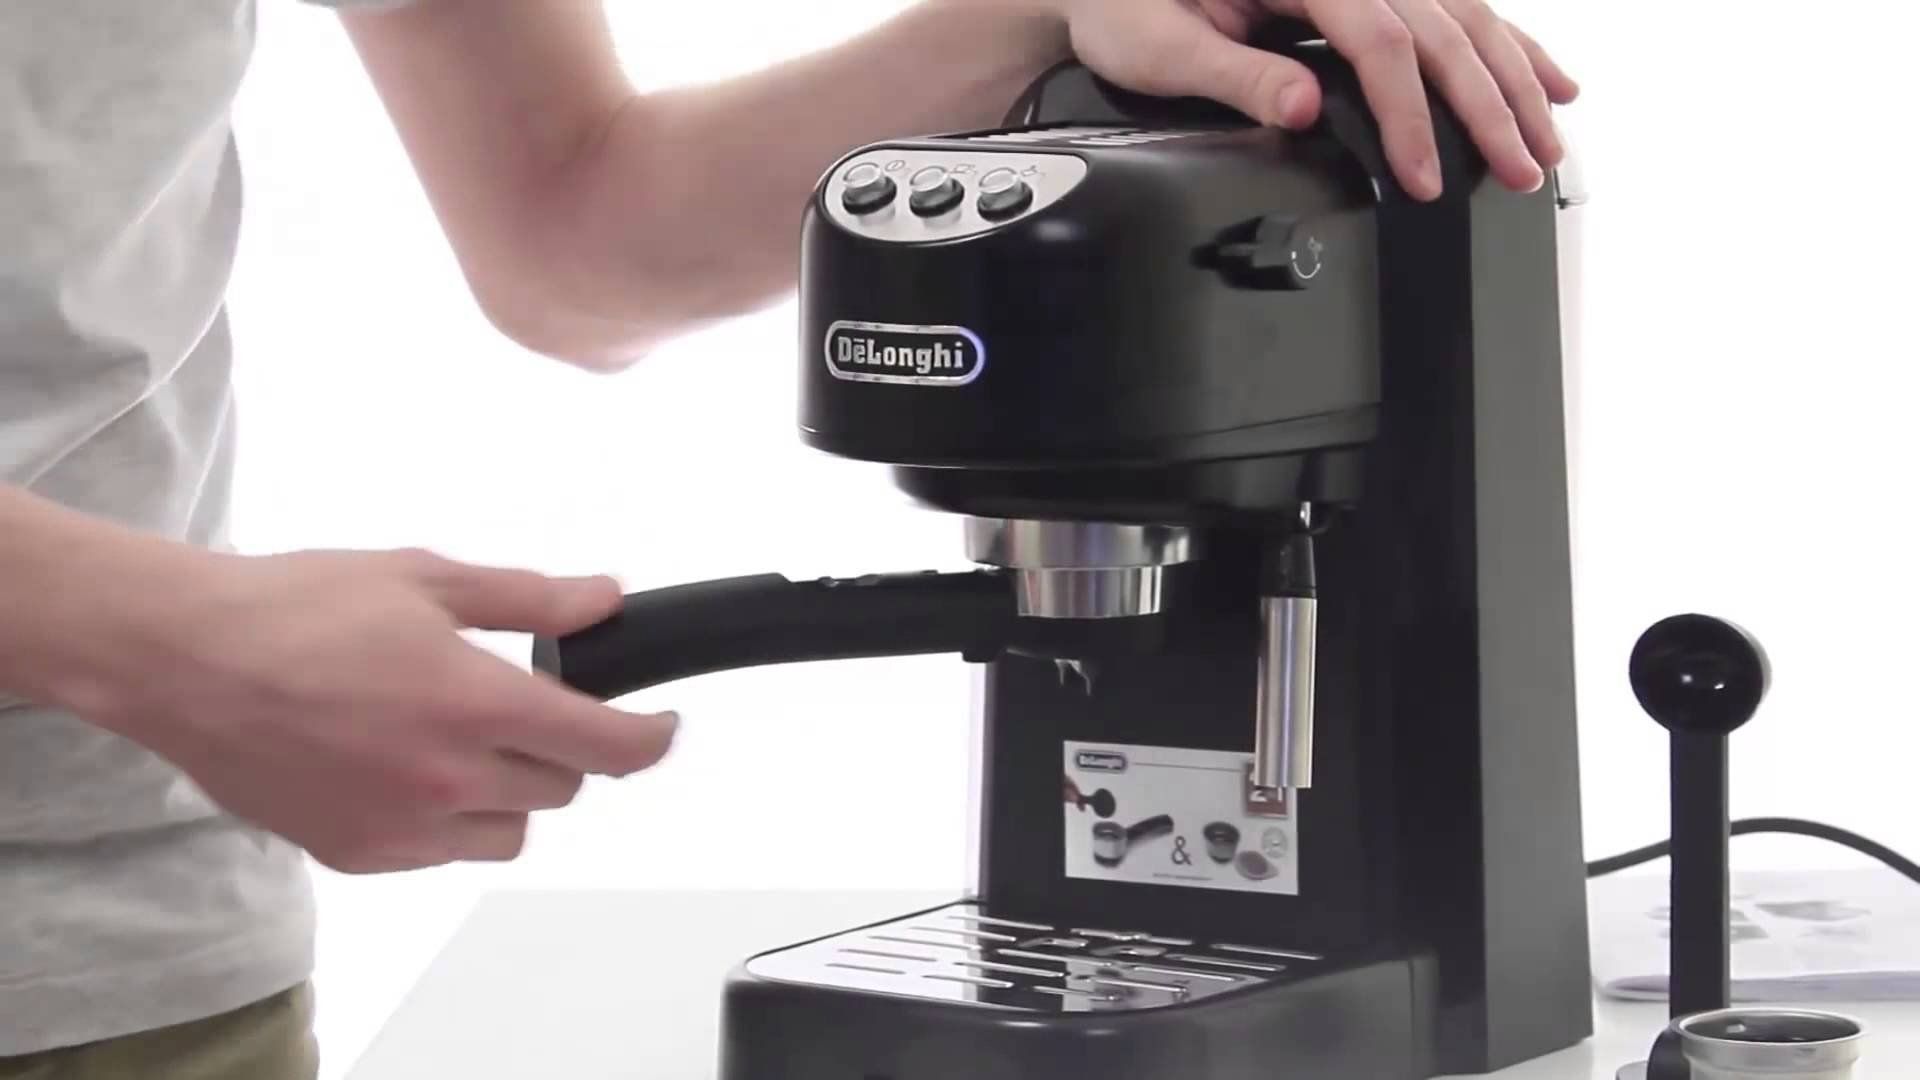 Best De'Longhi coffee machines for home and office in 2020